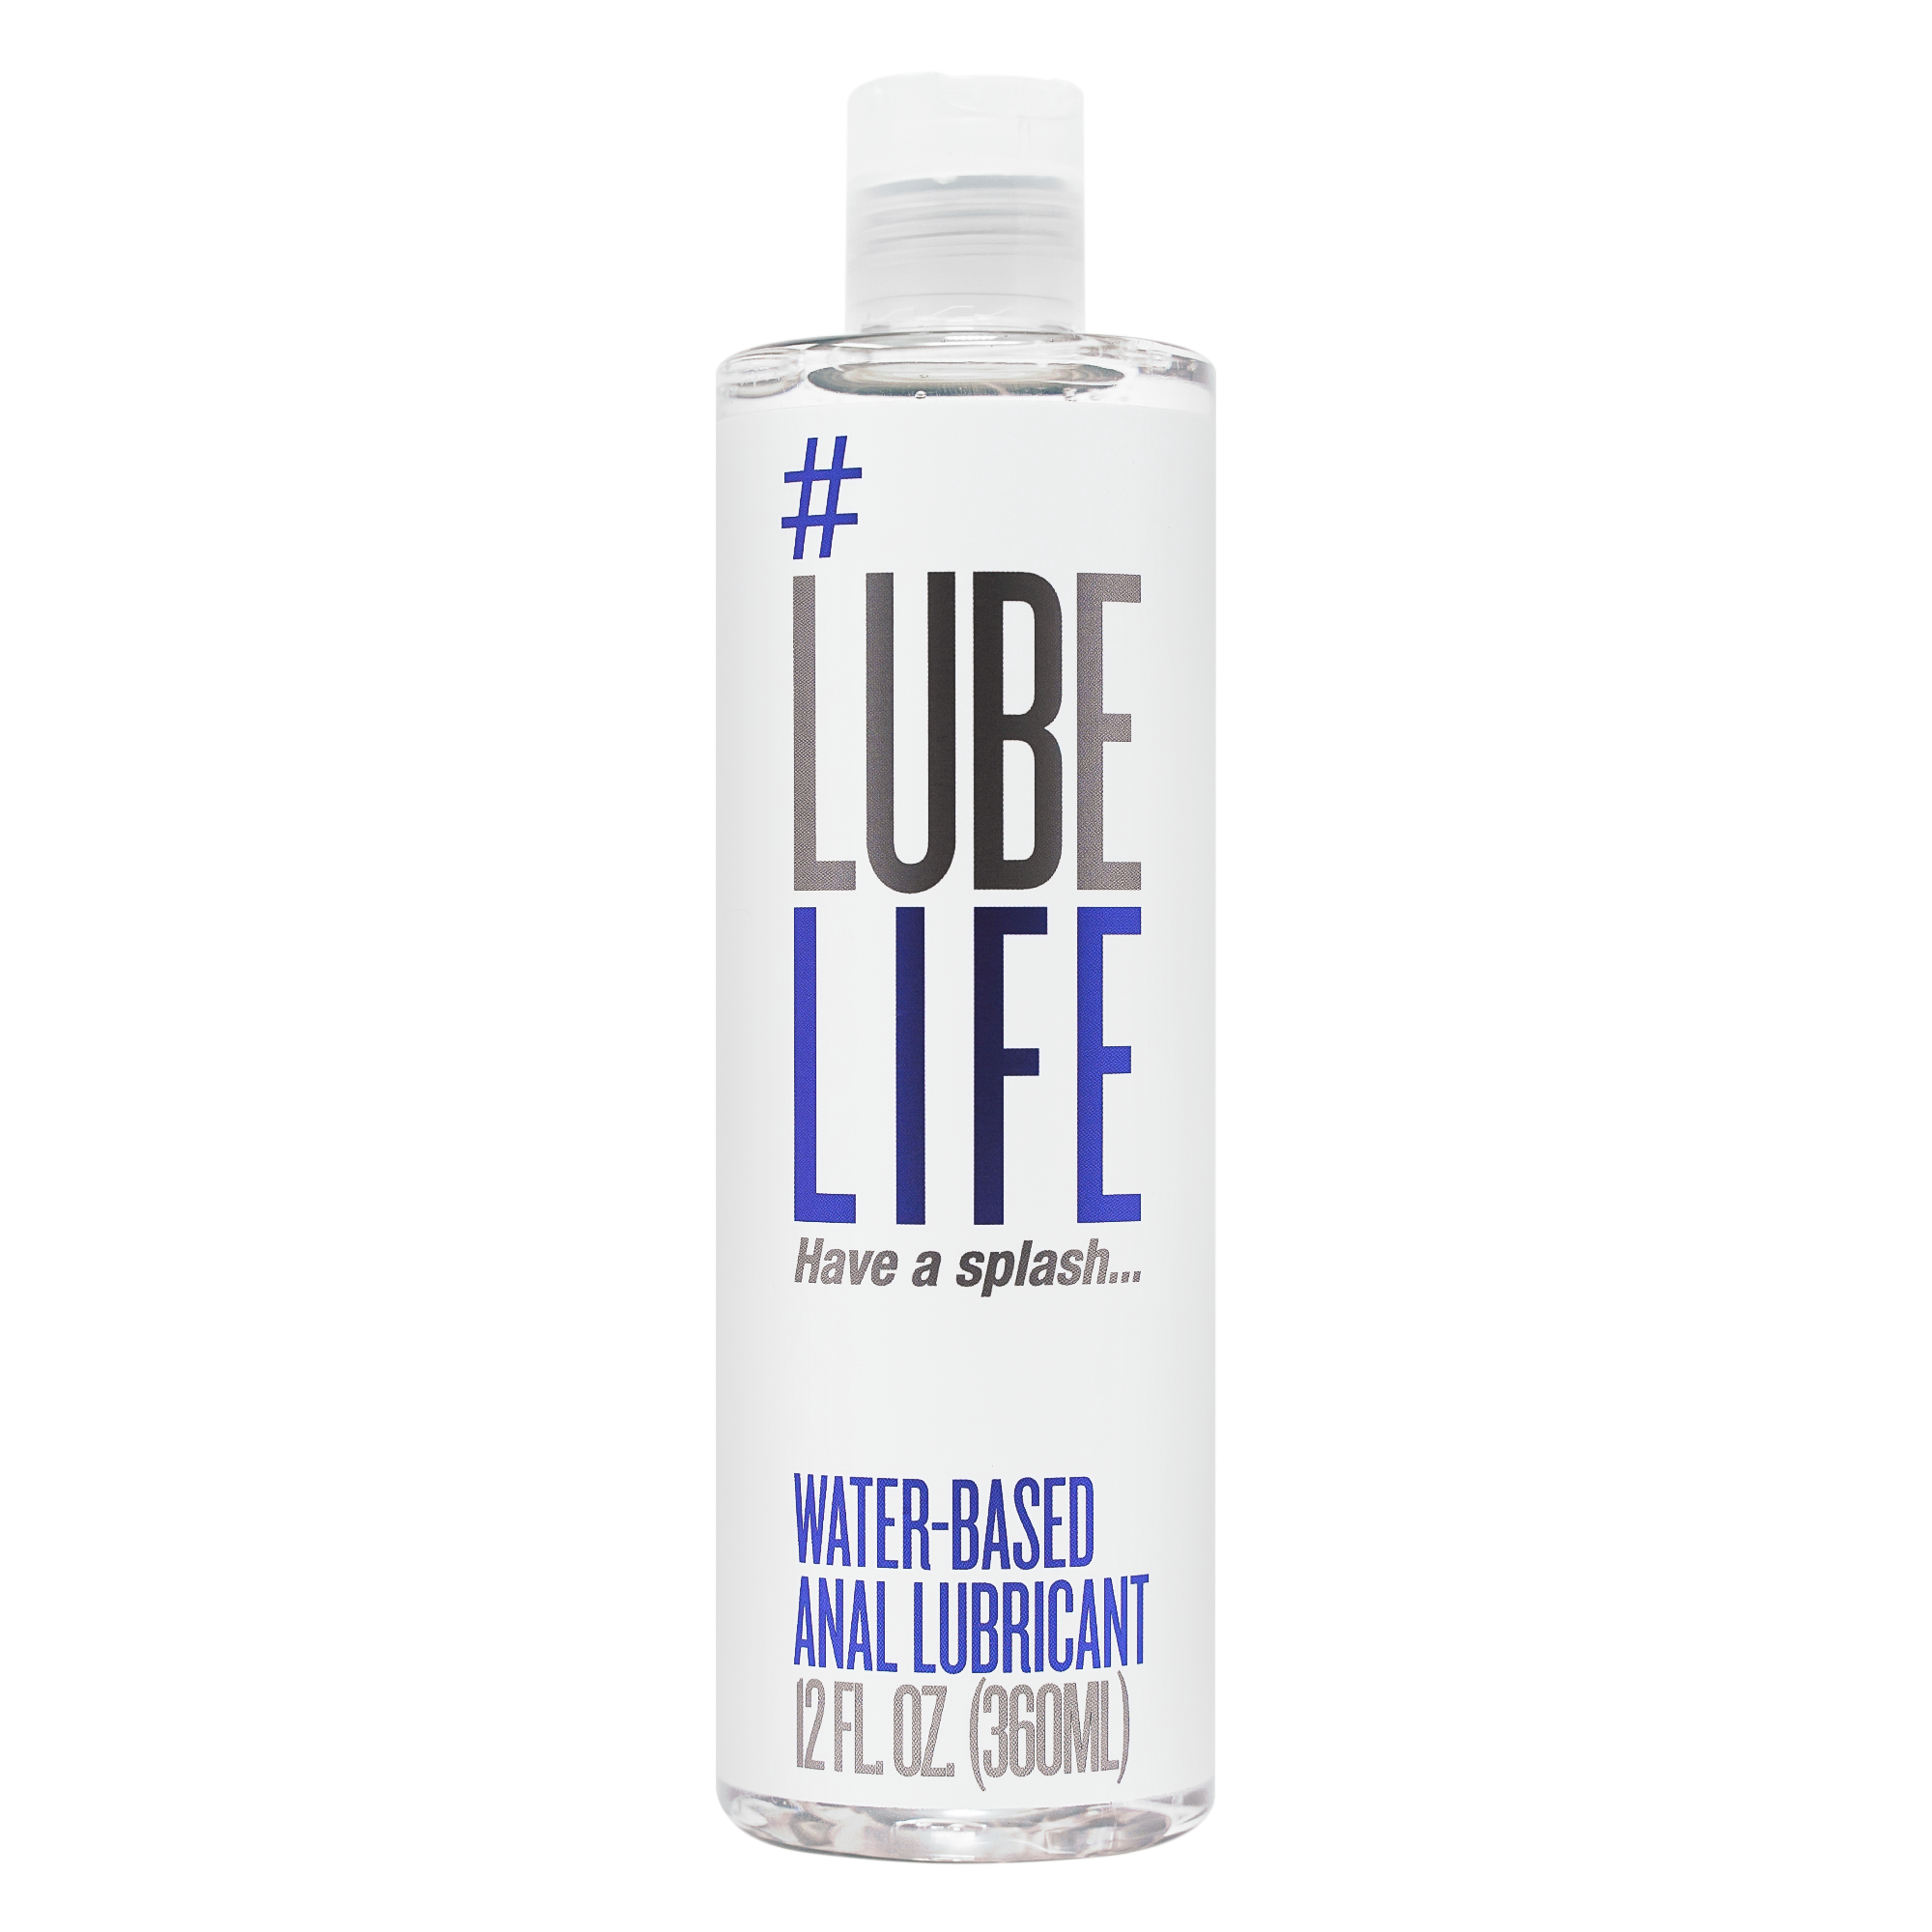 Lube Life Water Based Anal Lubricant, Lube for Men, Women and Couples, 12 fl oz - image 1 of 7